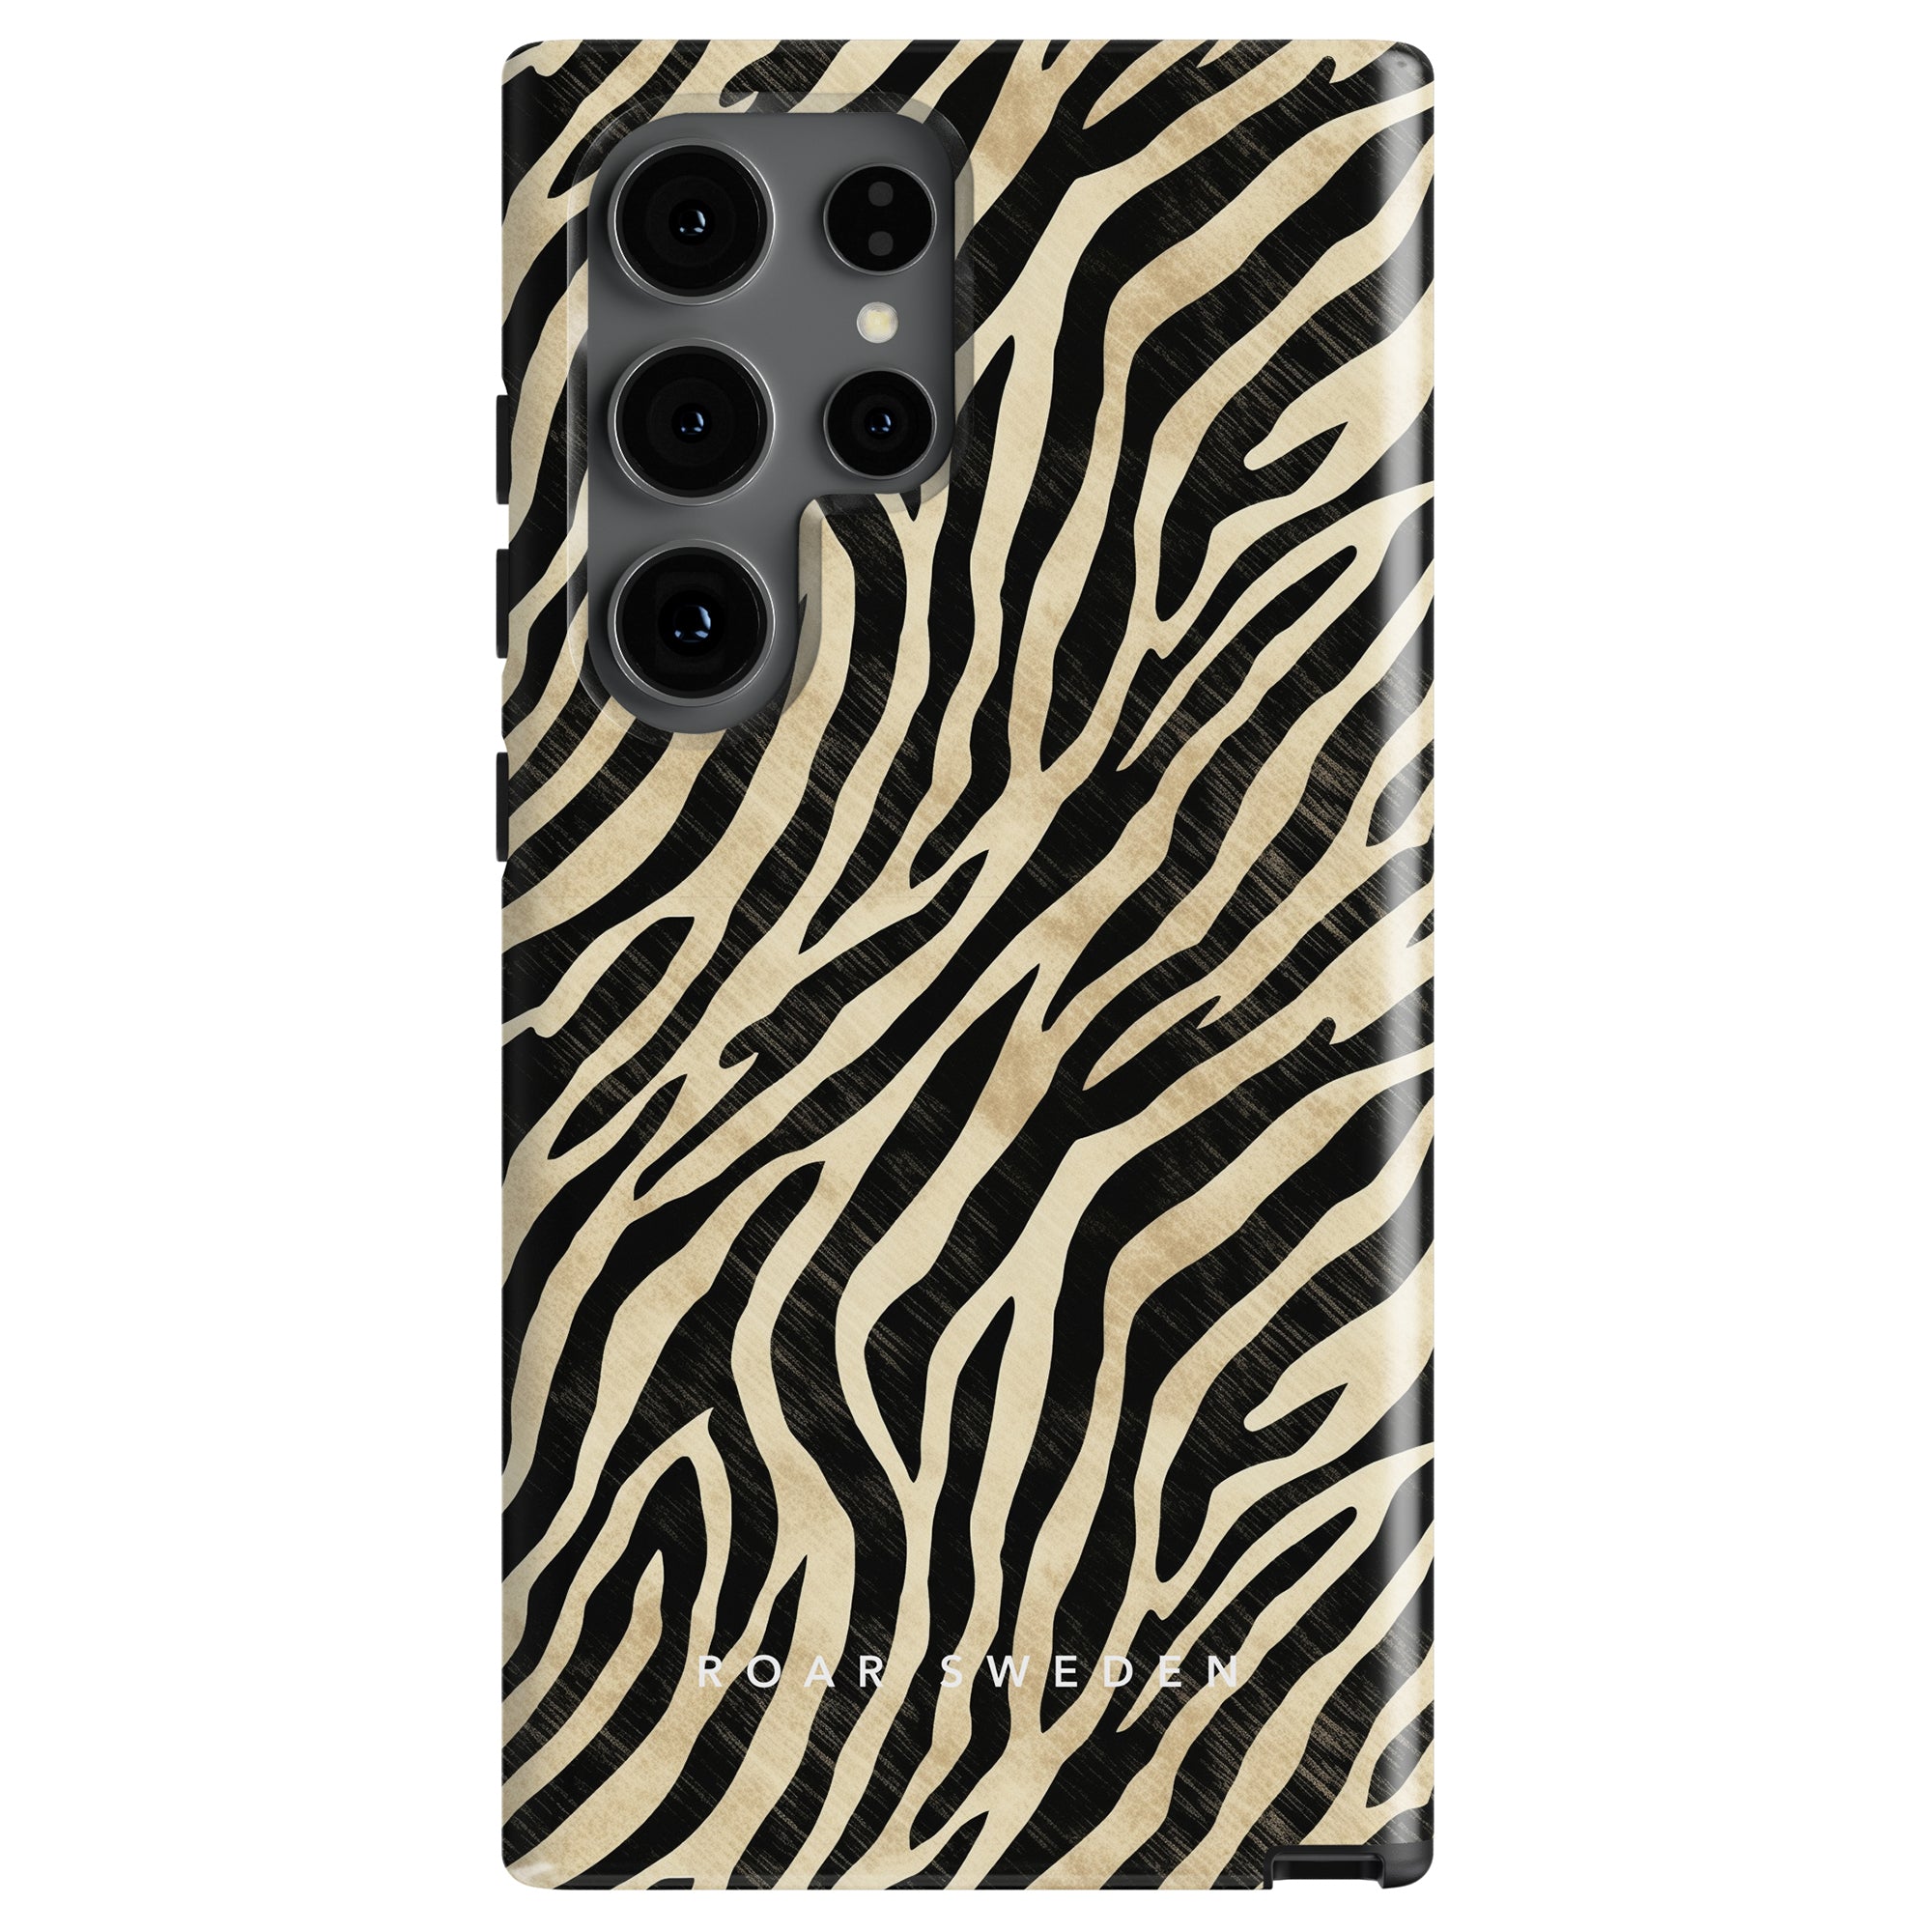 A smartphone with a zebra-striped case from the Zebra Collection, featuring multiple camera lenses and the brand name "ROAR SWEDEN" at the bottom. This Marty - Tough Case offers robust skydd for your device.